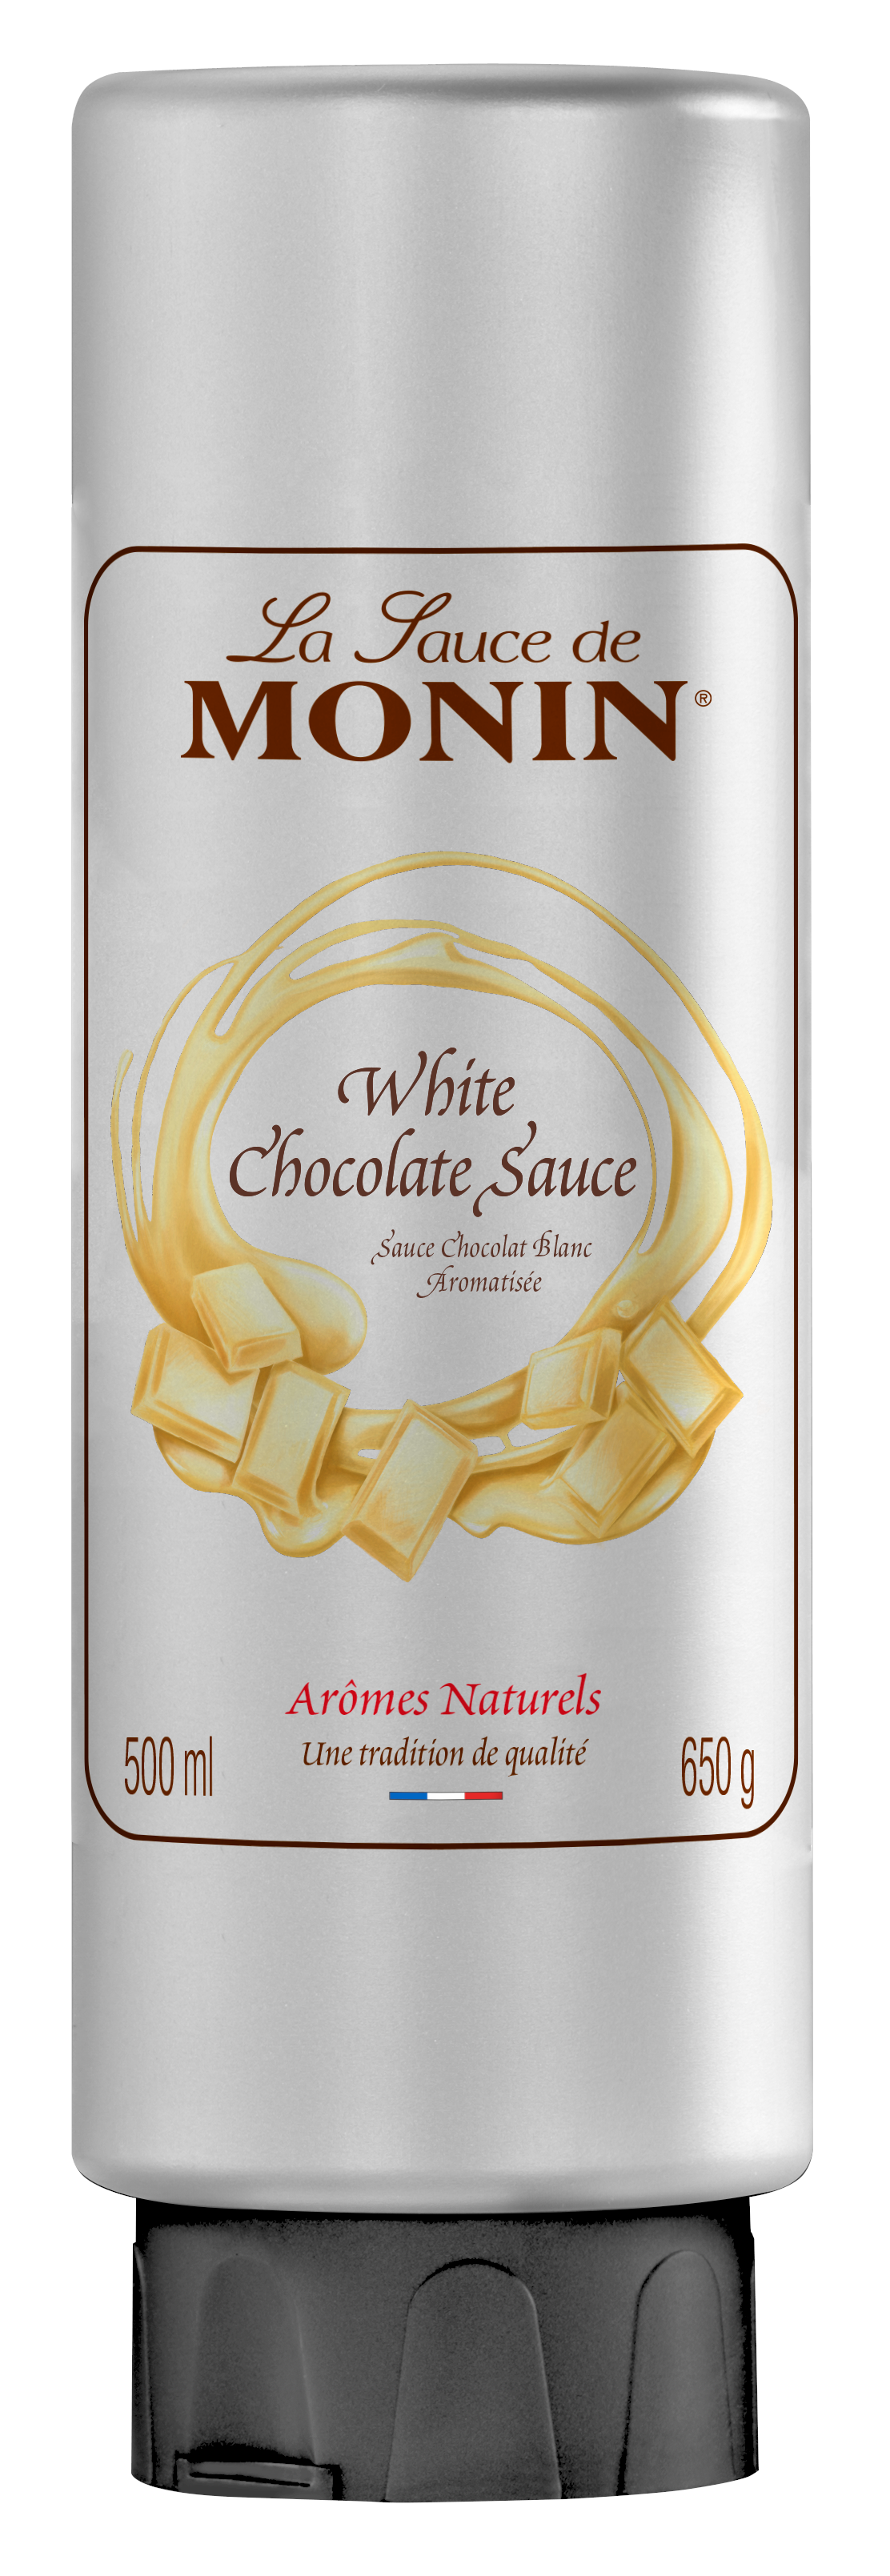 Buy MONIN White Chocolate sauce. It oozes creamy, buttery tastes and aromas.